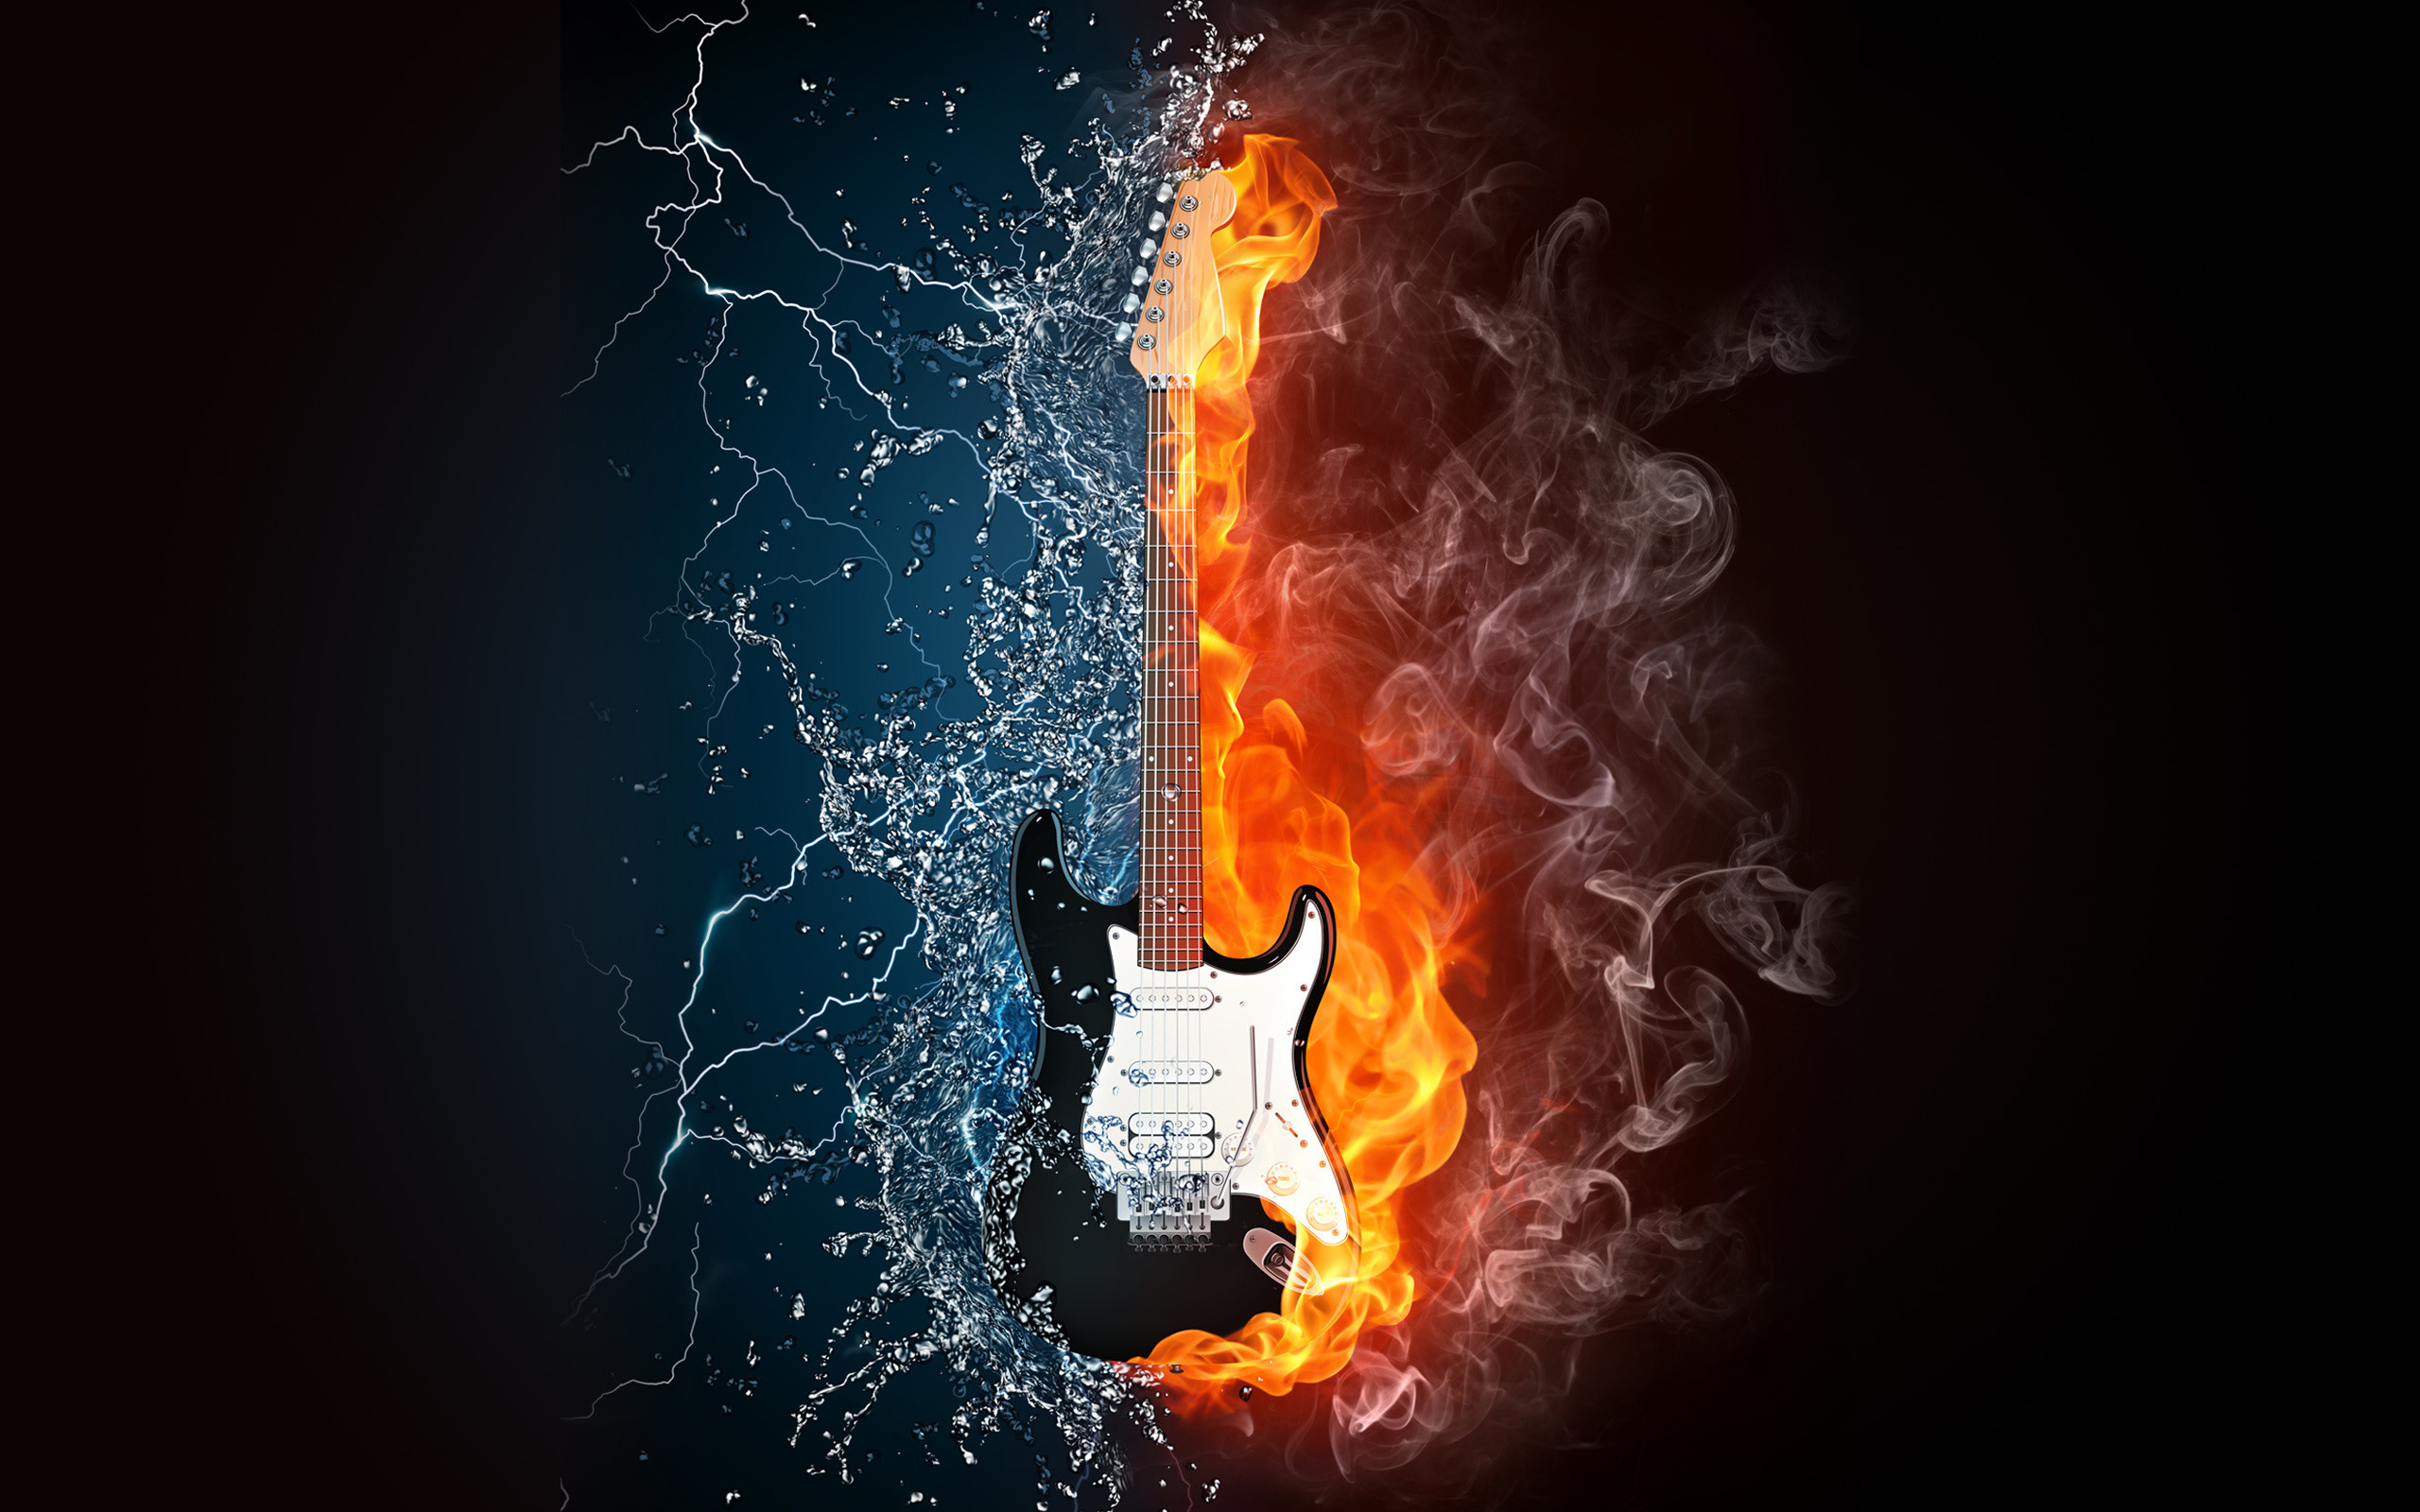 2560x1600 images guitar wallpapers high apple mac wallpapers tablet amazing artworks  4k wallpaper for iphone free 2560Ã1600 Wallpaper HD